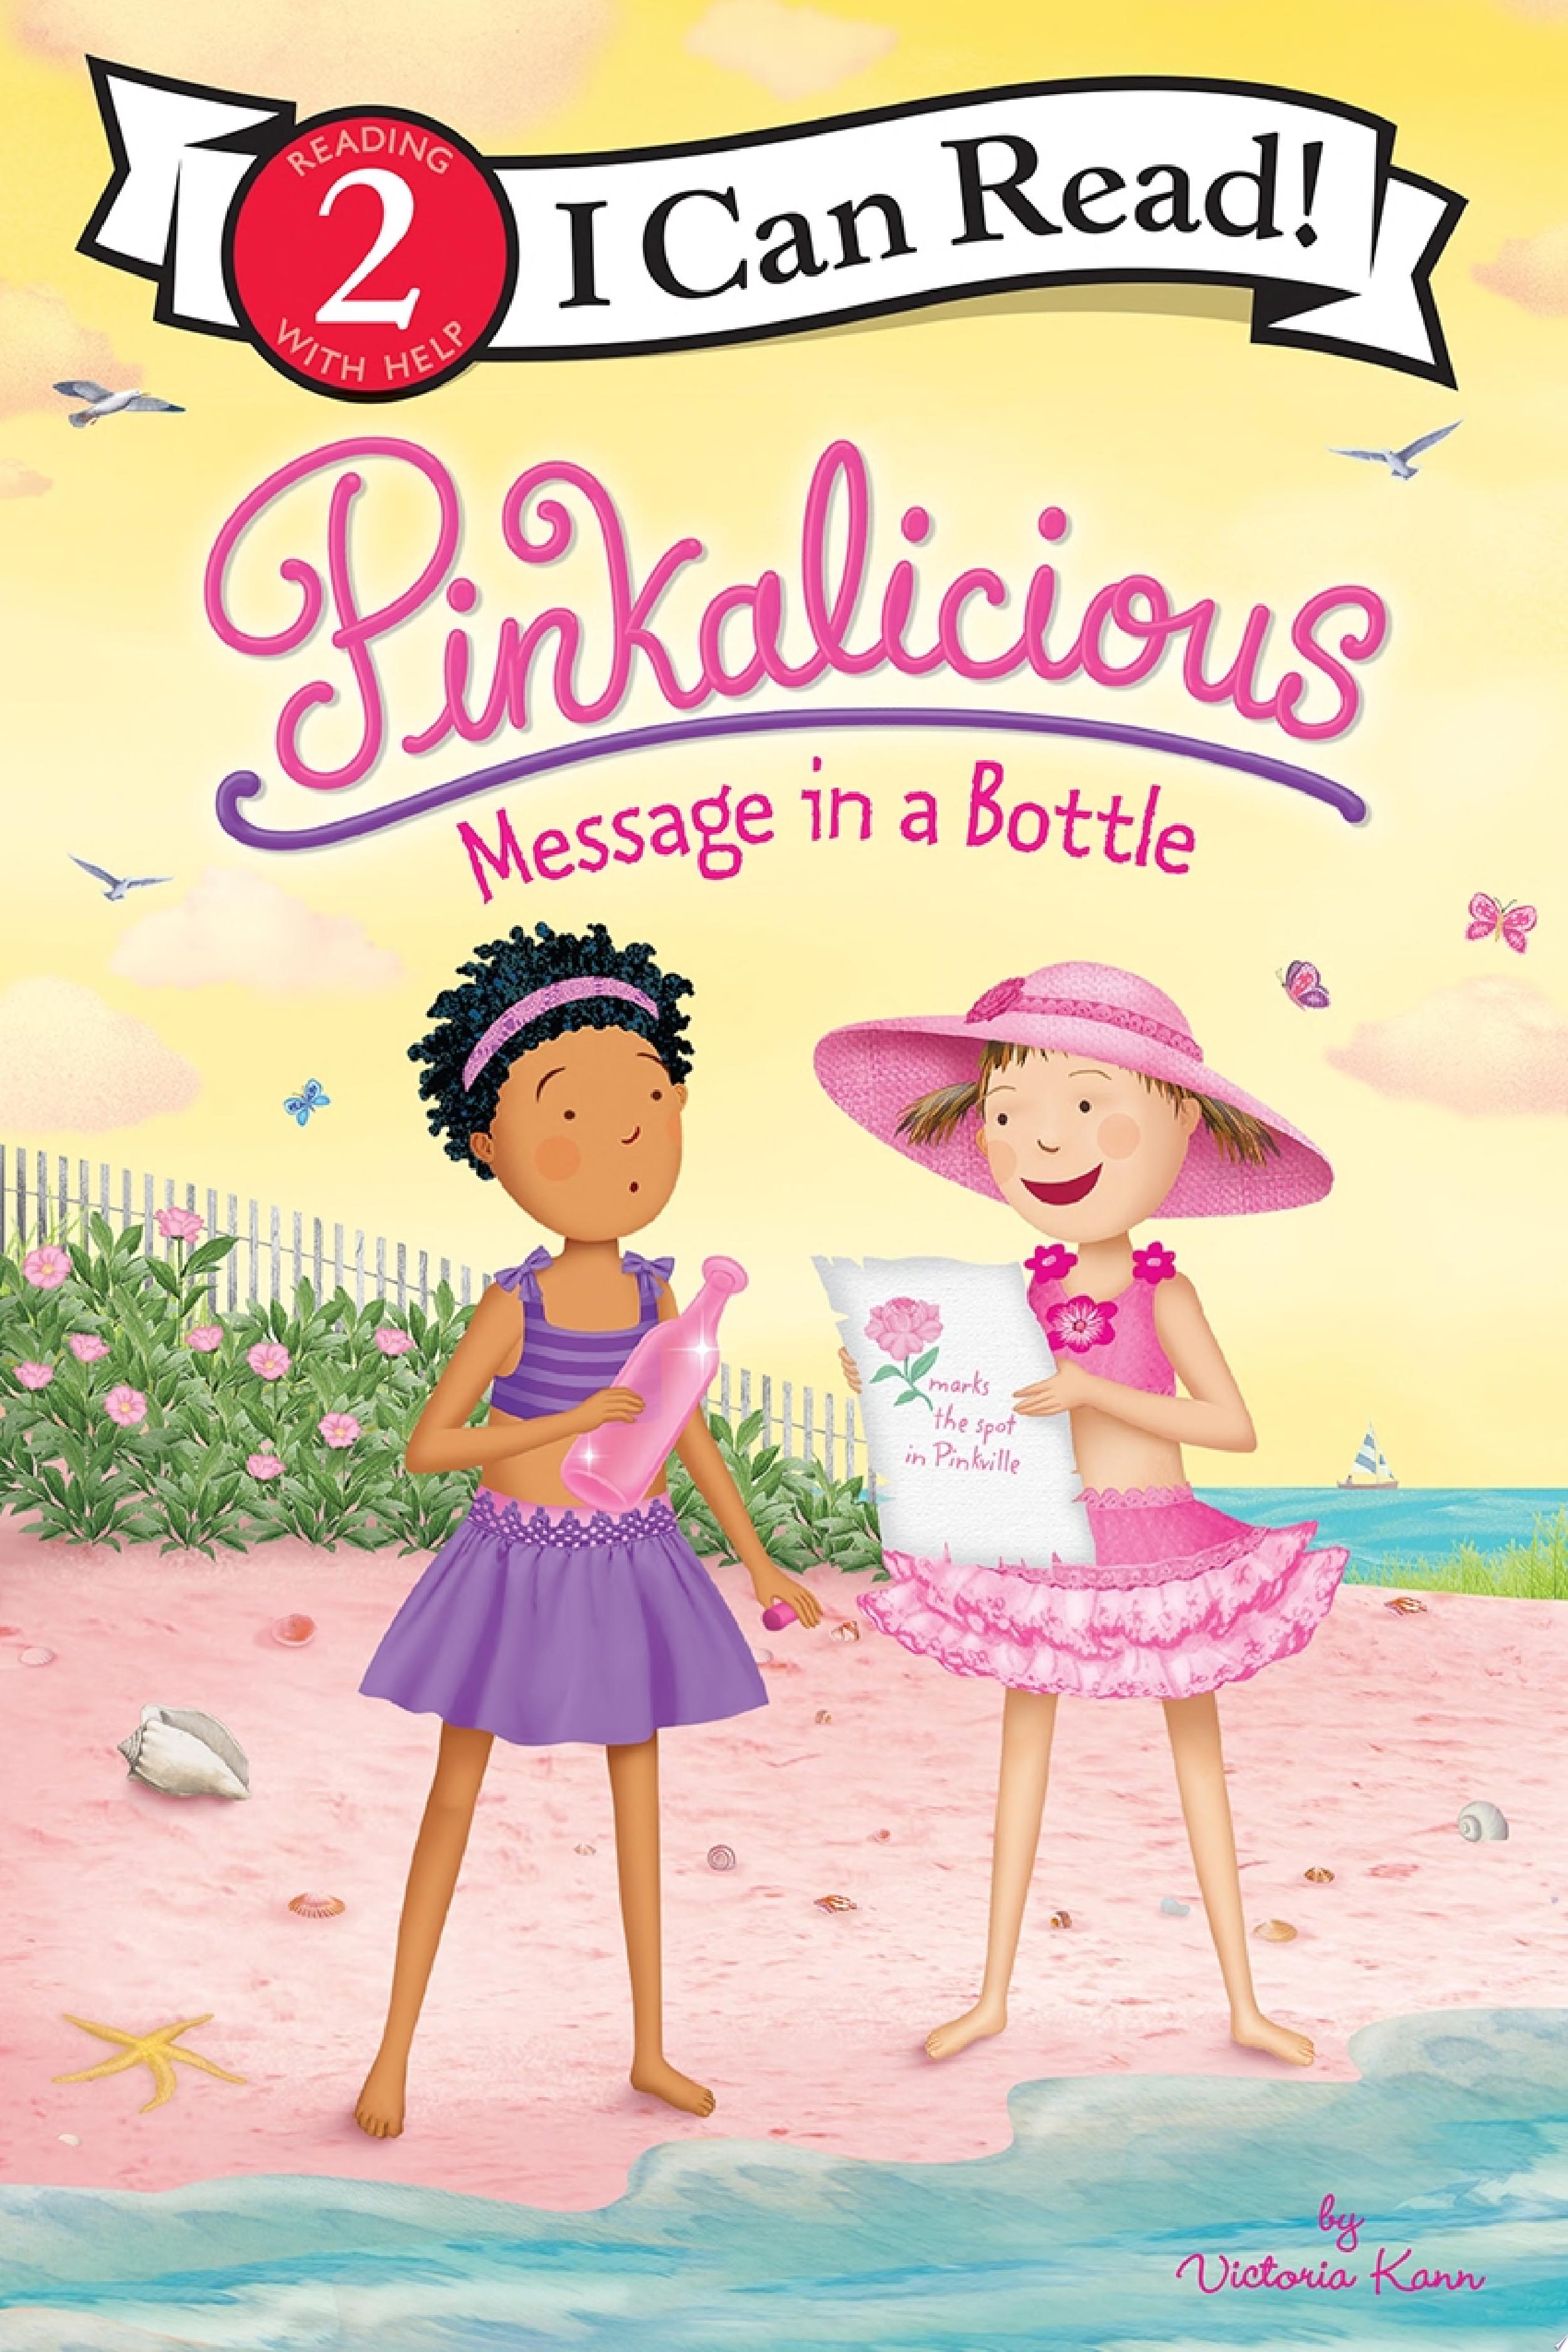 Image for "Pinkalicious: Message in a Bottle"